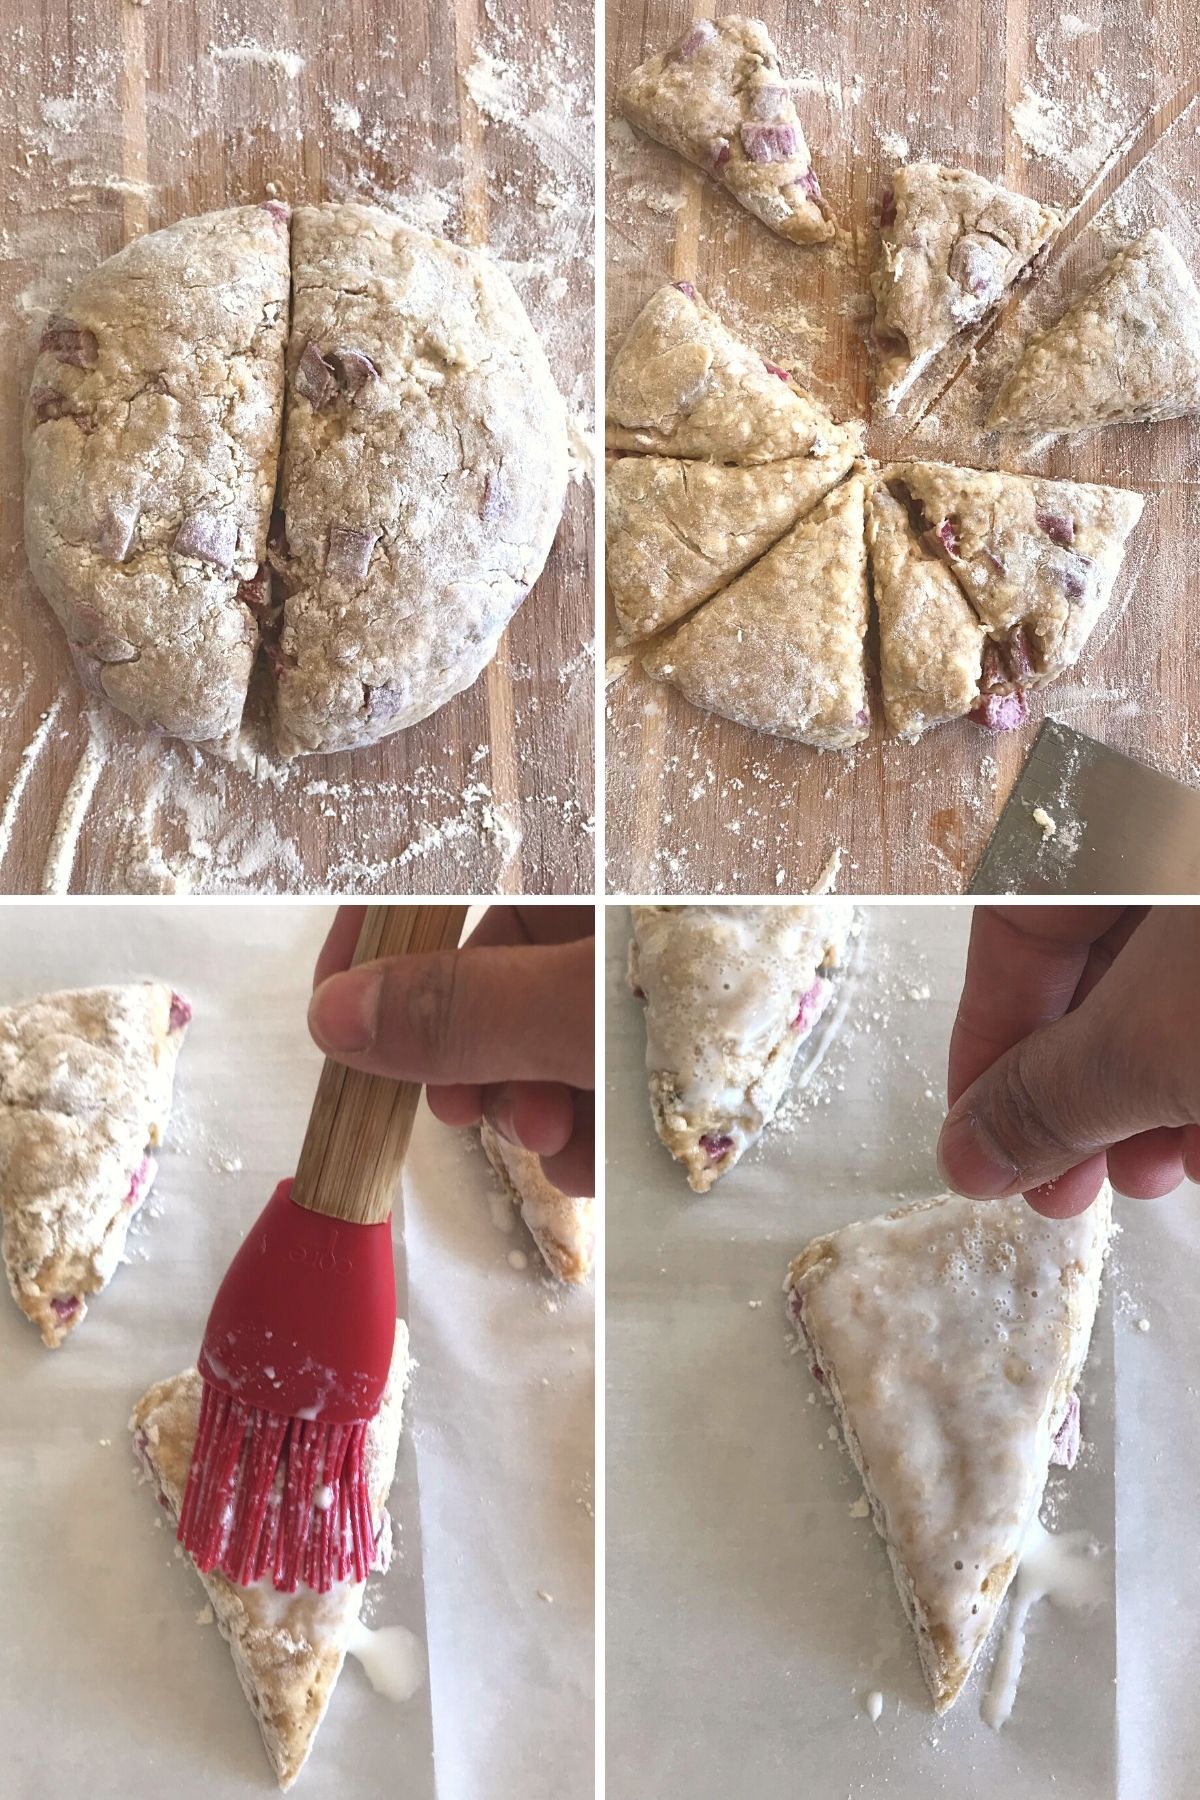 A collage of 4 images showing how to shape rhubarb scones.